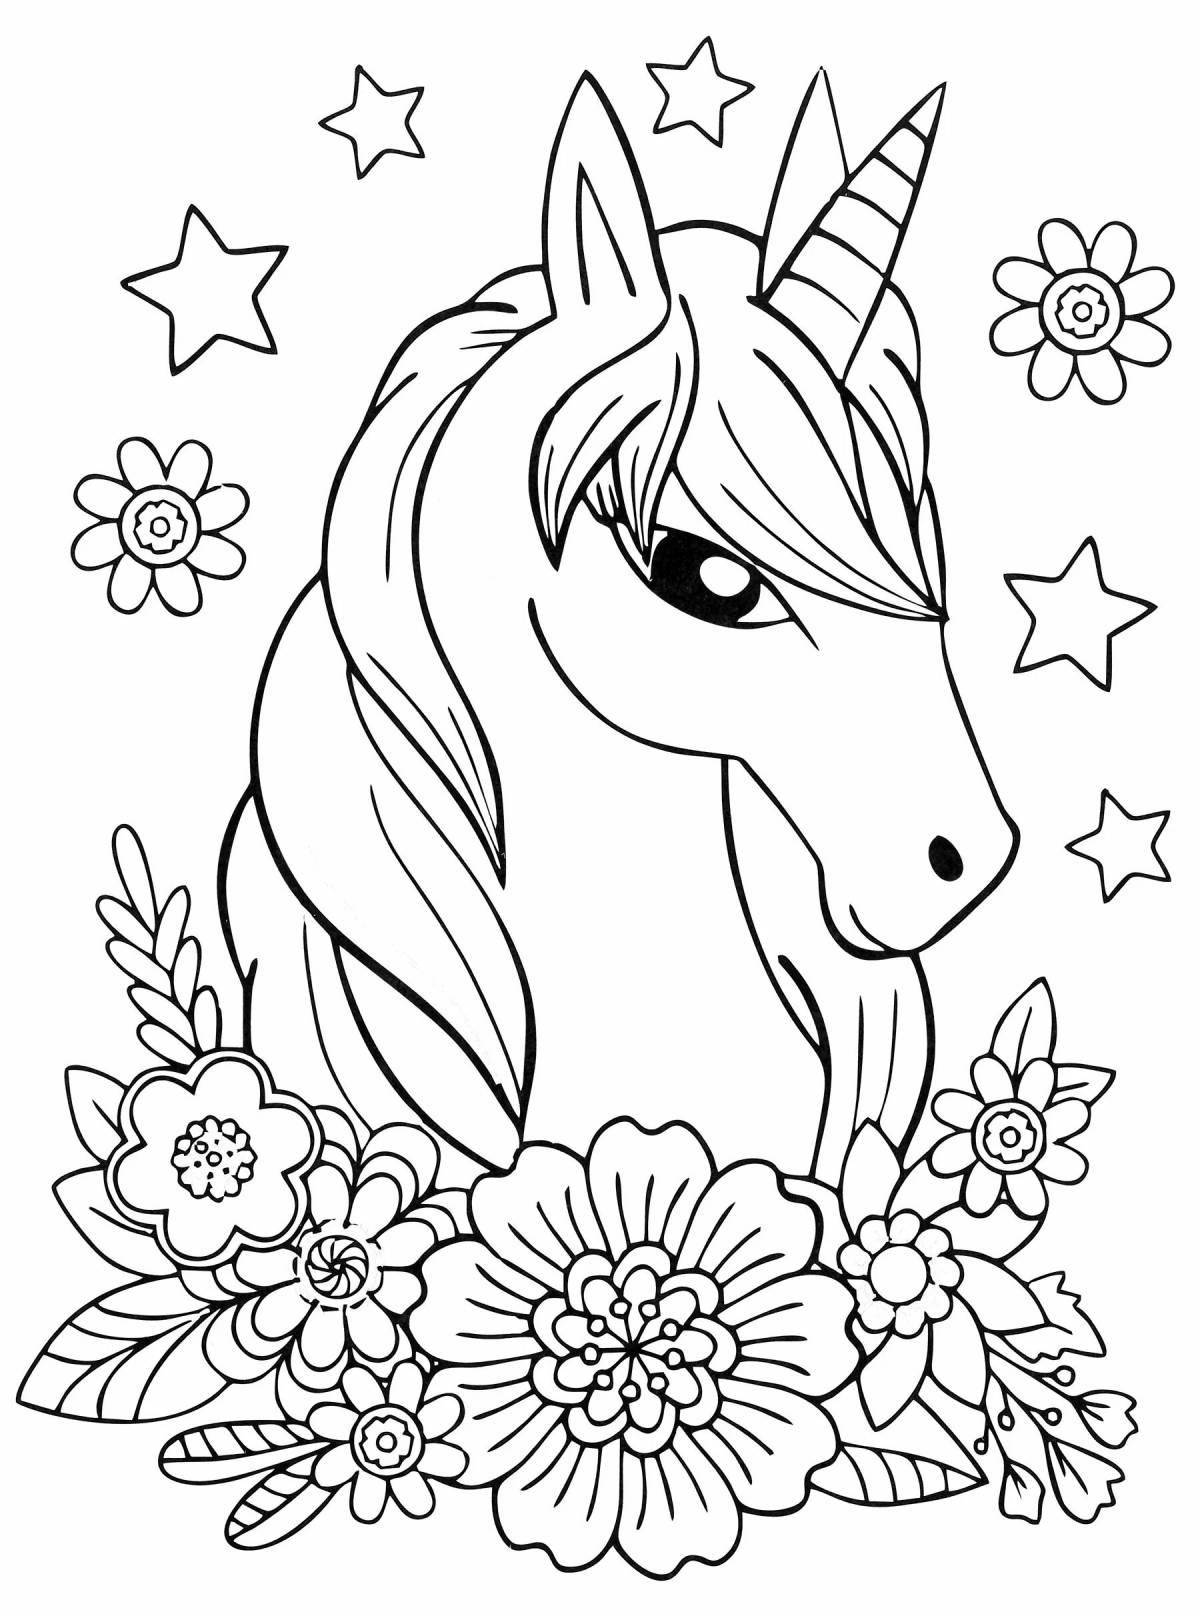 Cute coloring book for girls 9-10 years old - very beautiful animals